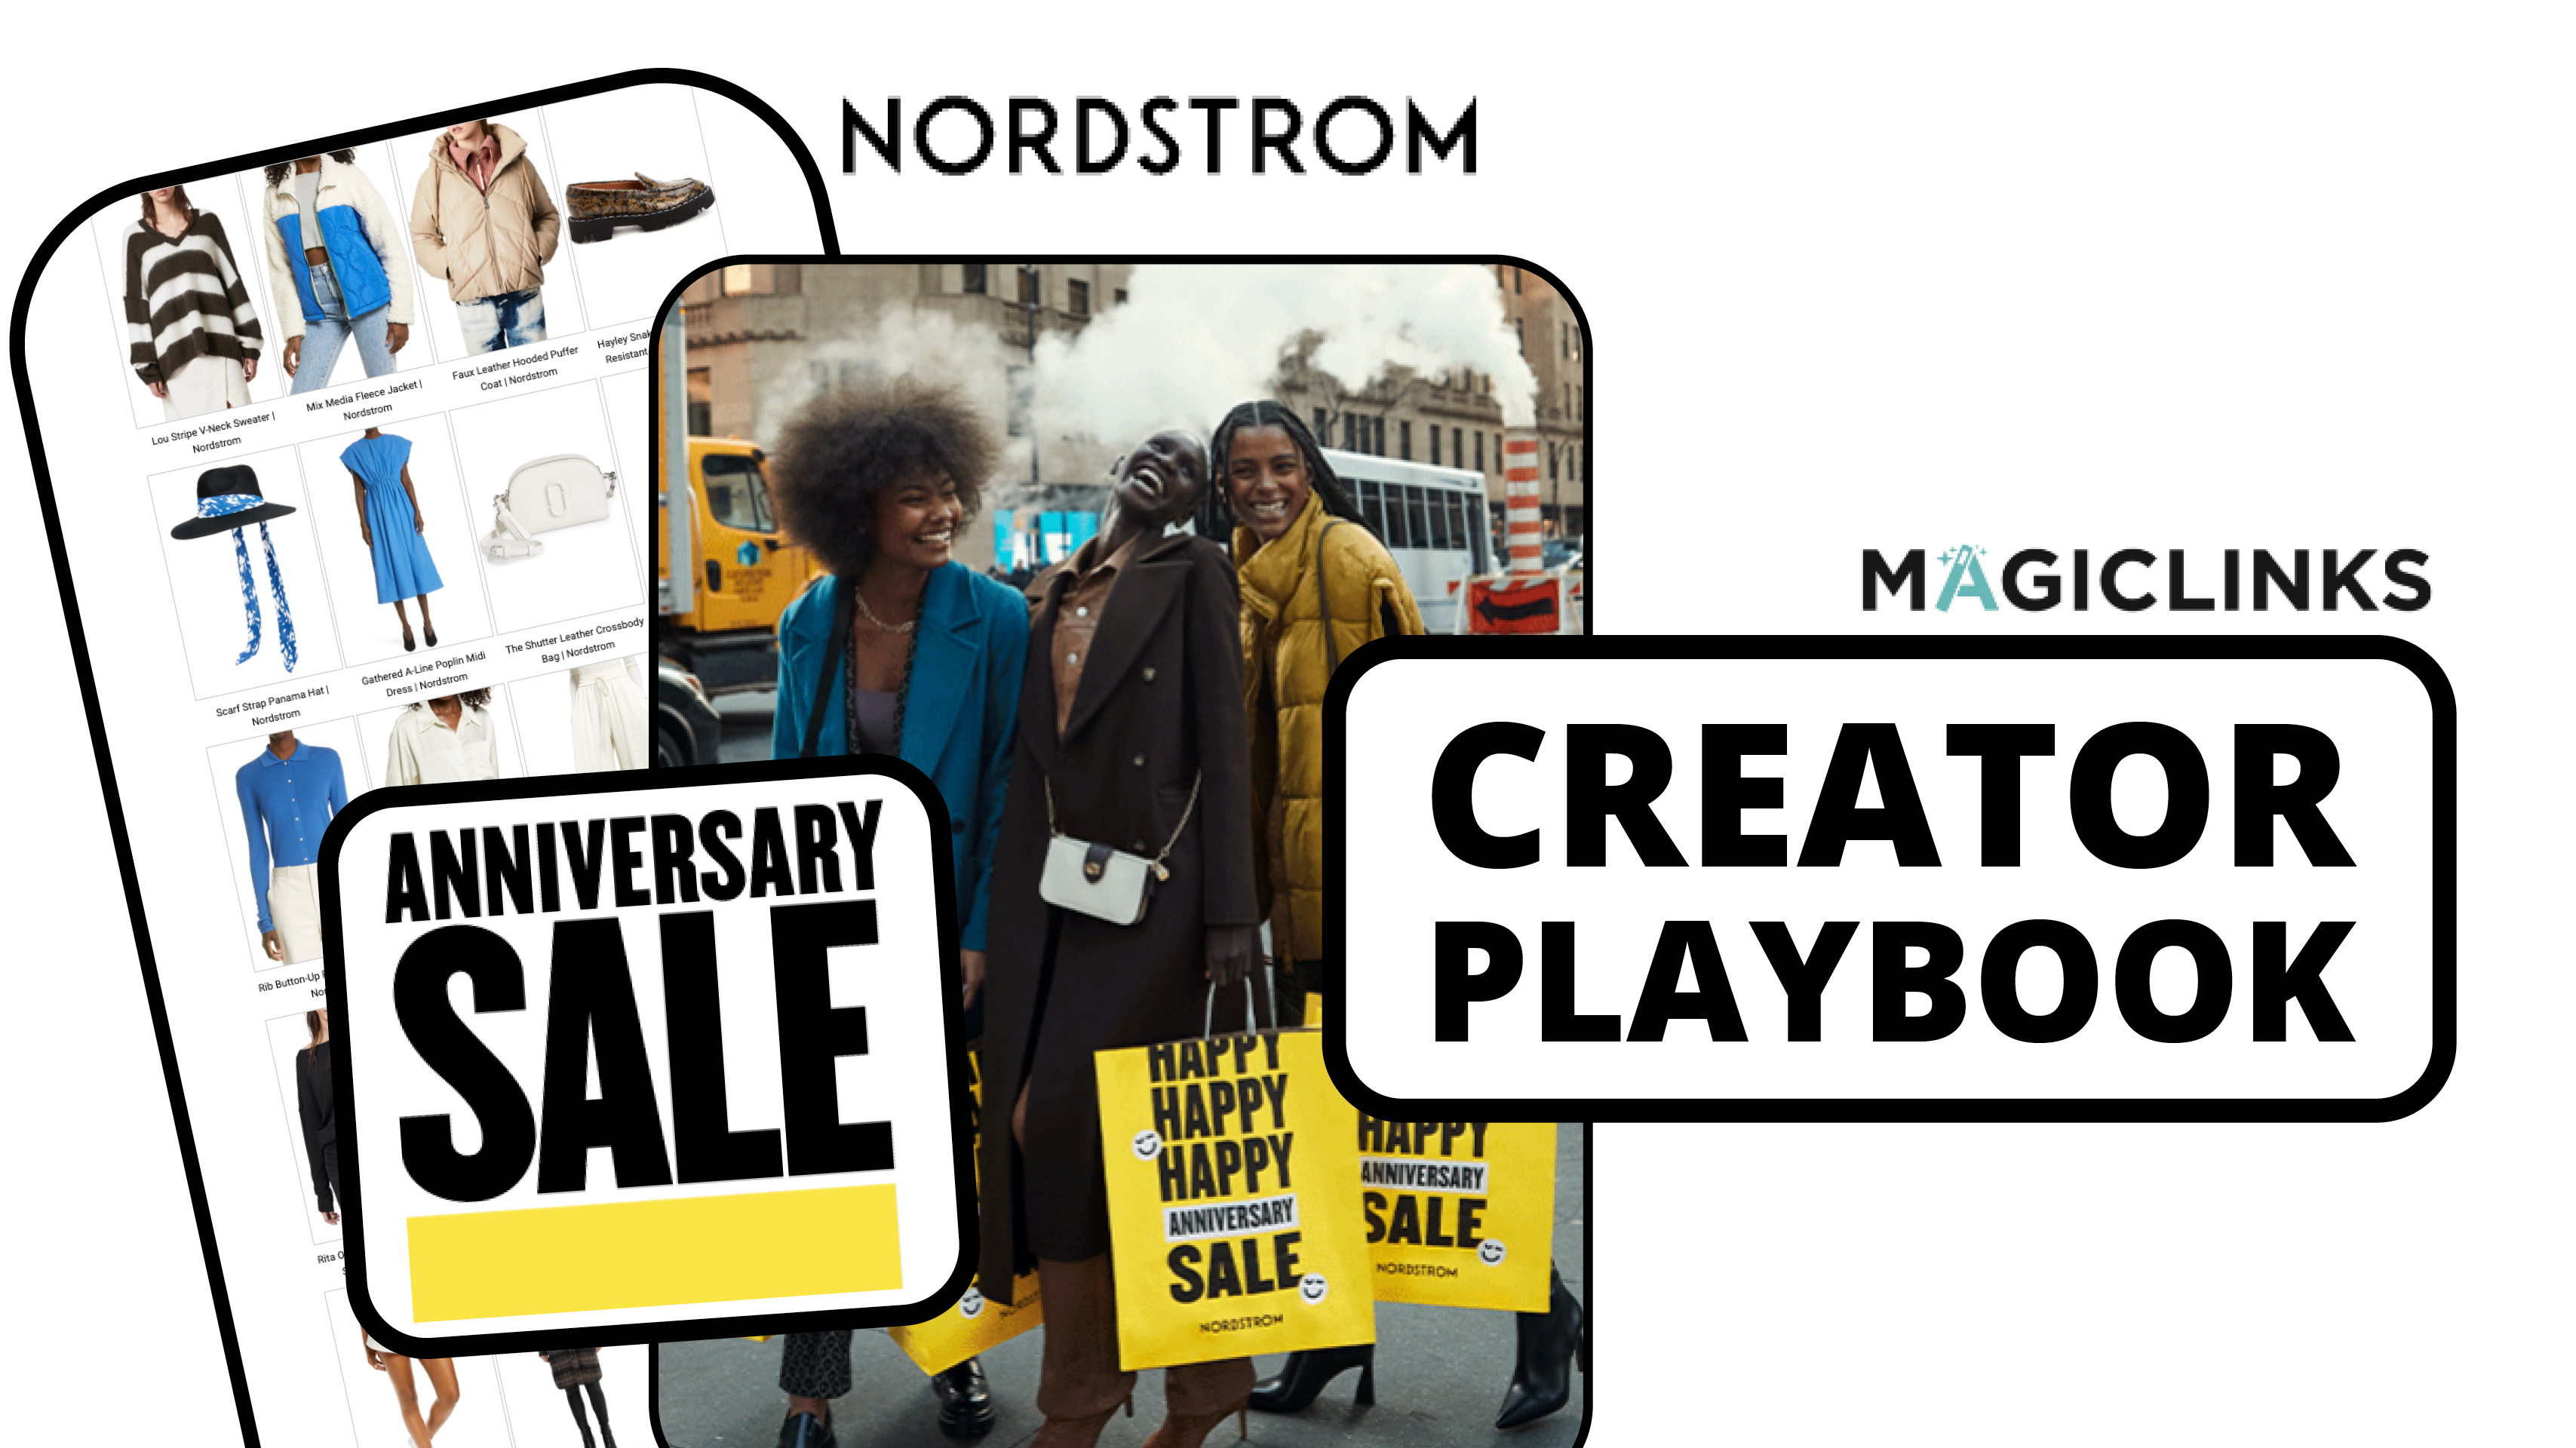 magiclinks creator guide for nordstrom sale